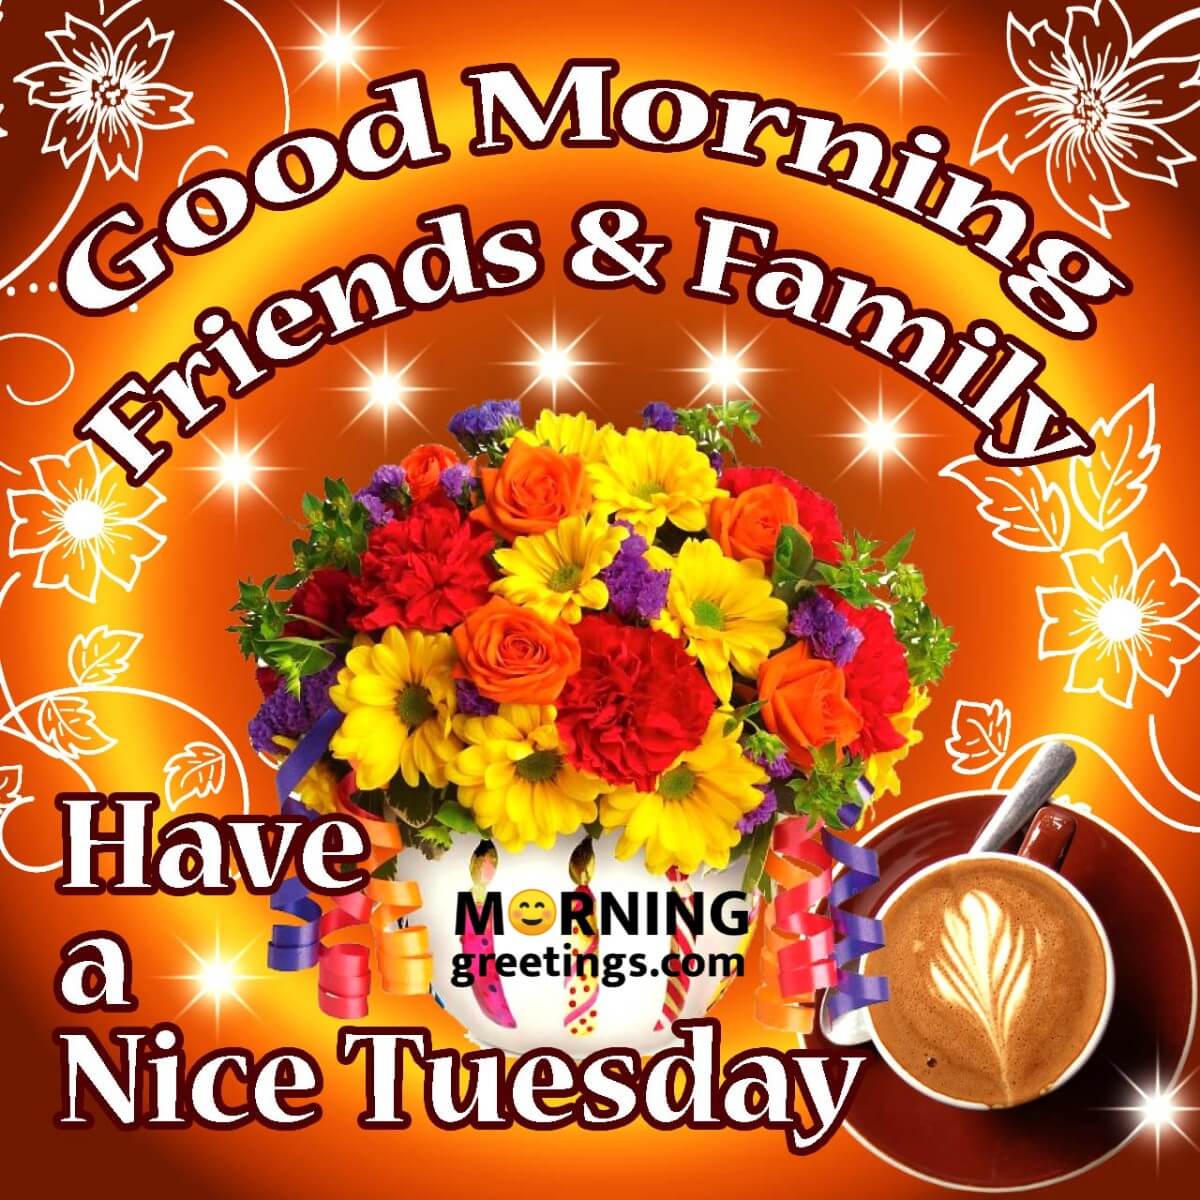 Good Morning Friends And Family Have A Nice Tuesday